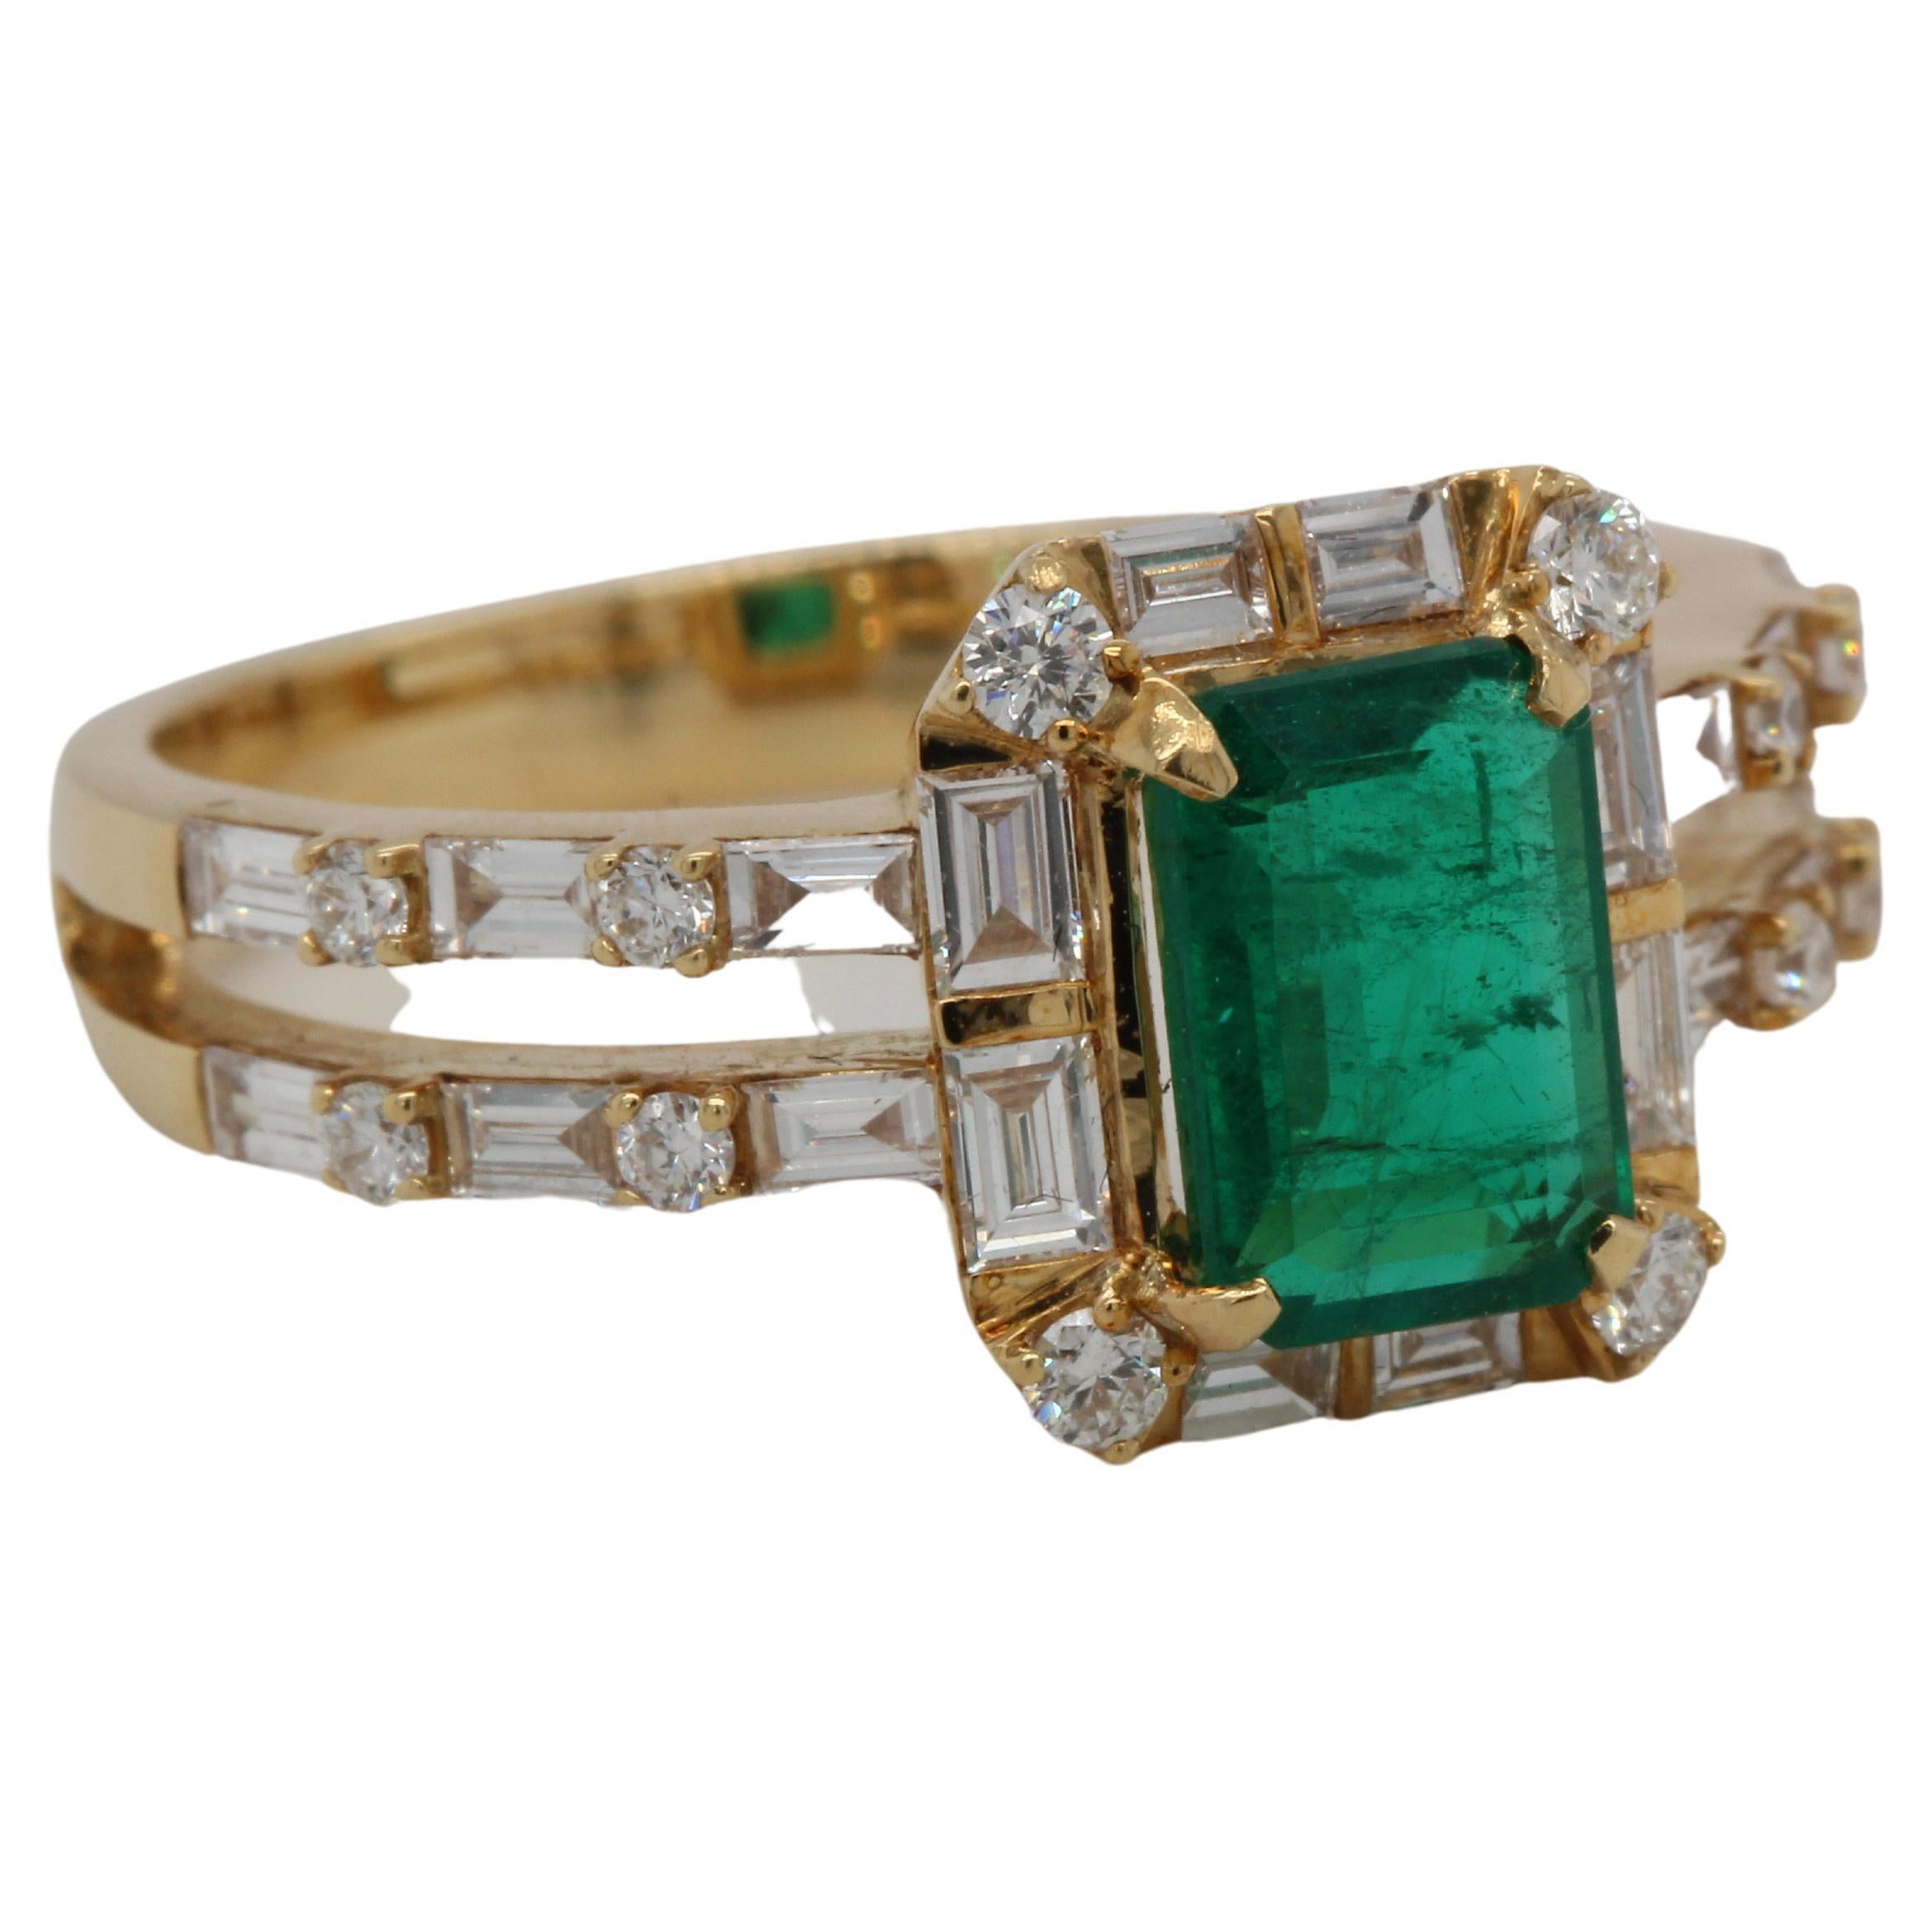 Women's or Men's 1.04 Carat Emerald and Diamond Solitaire Ring in 18 Karat Gold For Sale